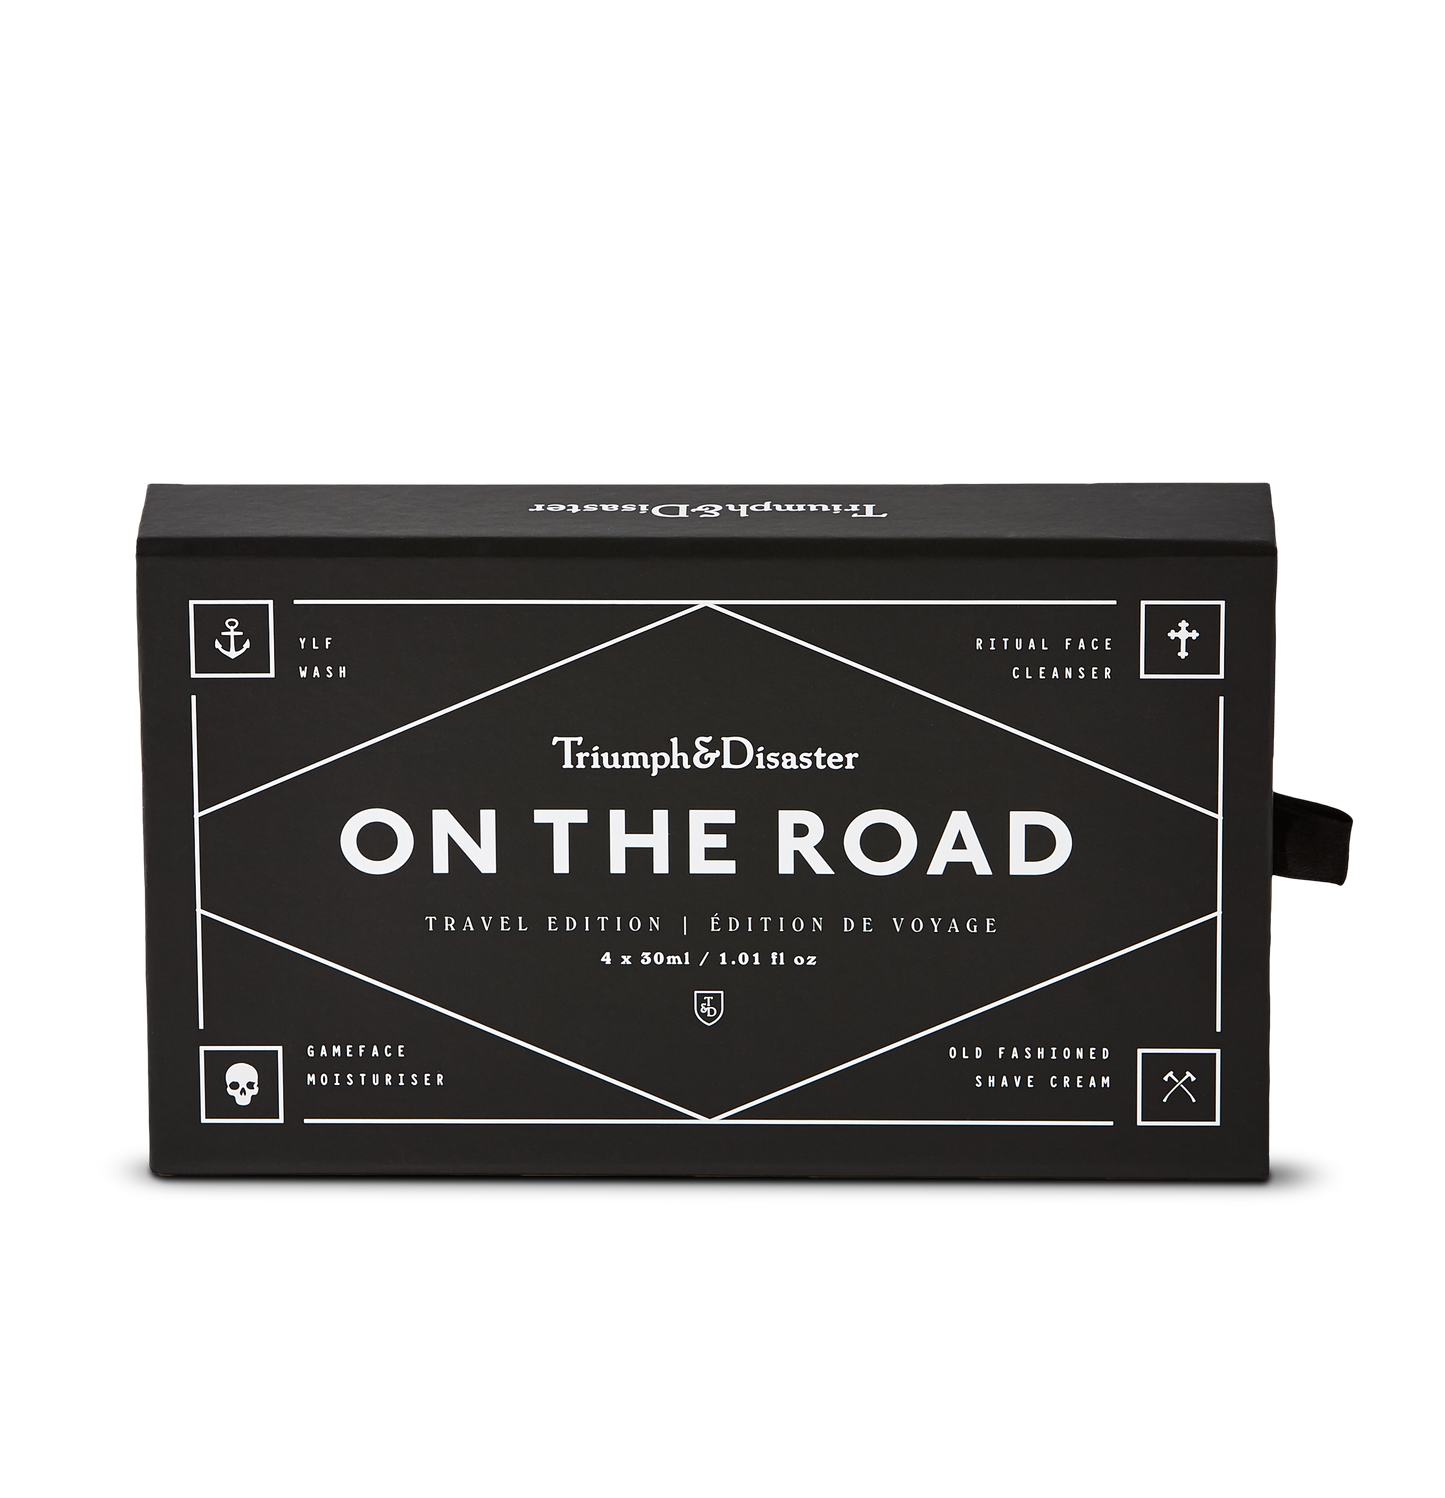 On the Road - Travel Kit by Triumph and Disaster